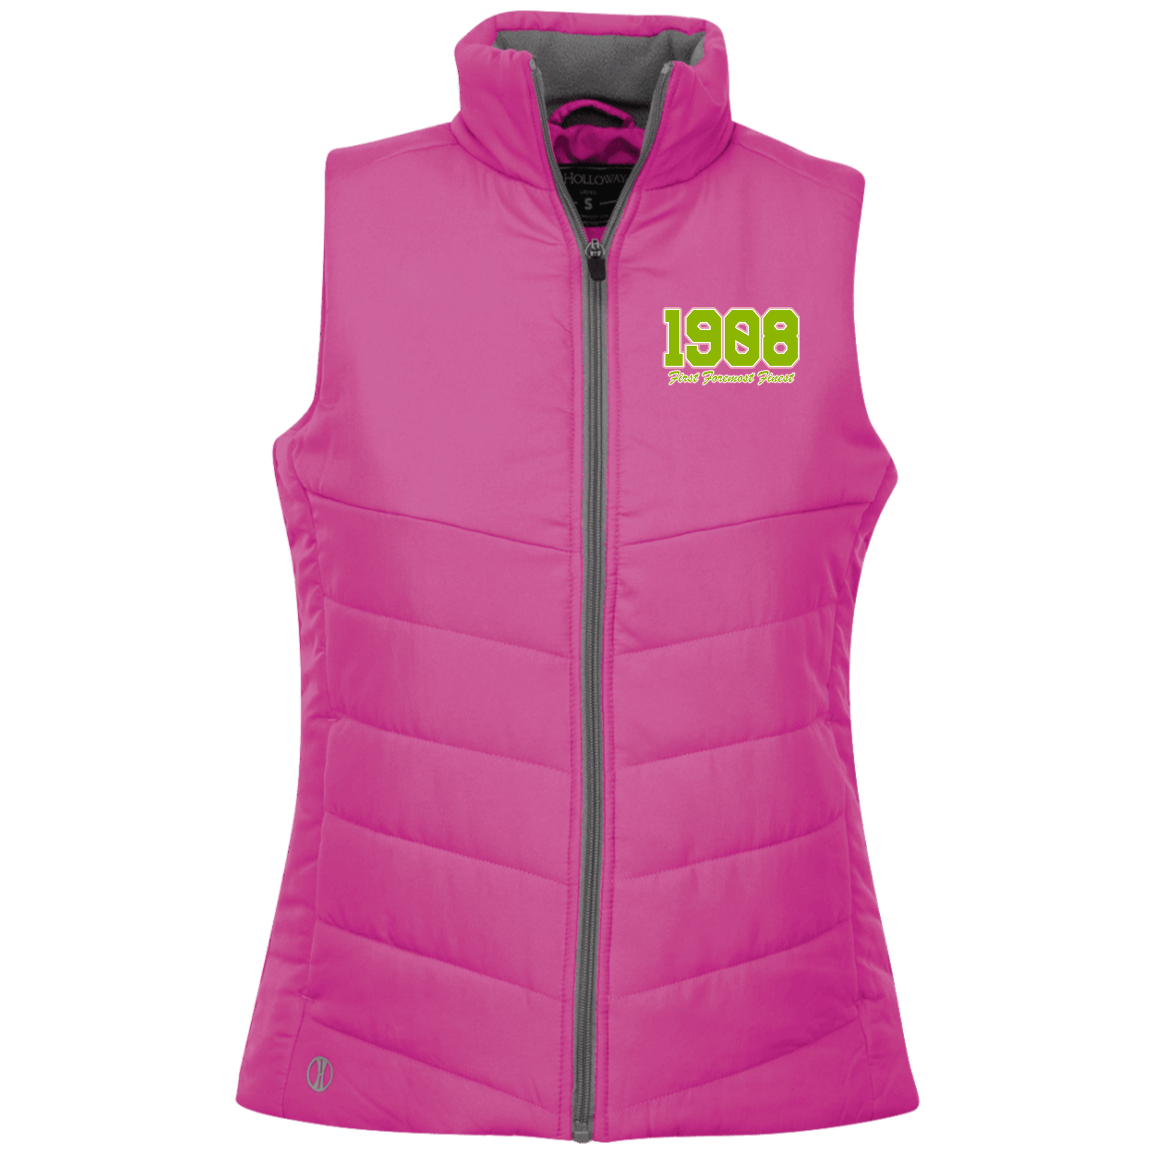 First Foremost Finest Ladies' Quilted Vest